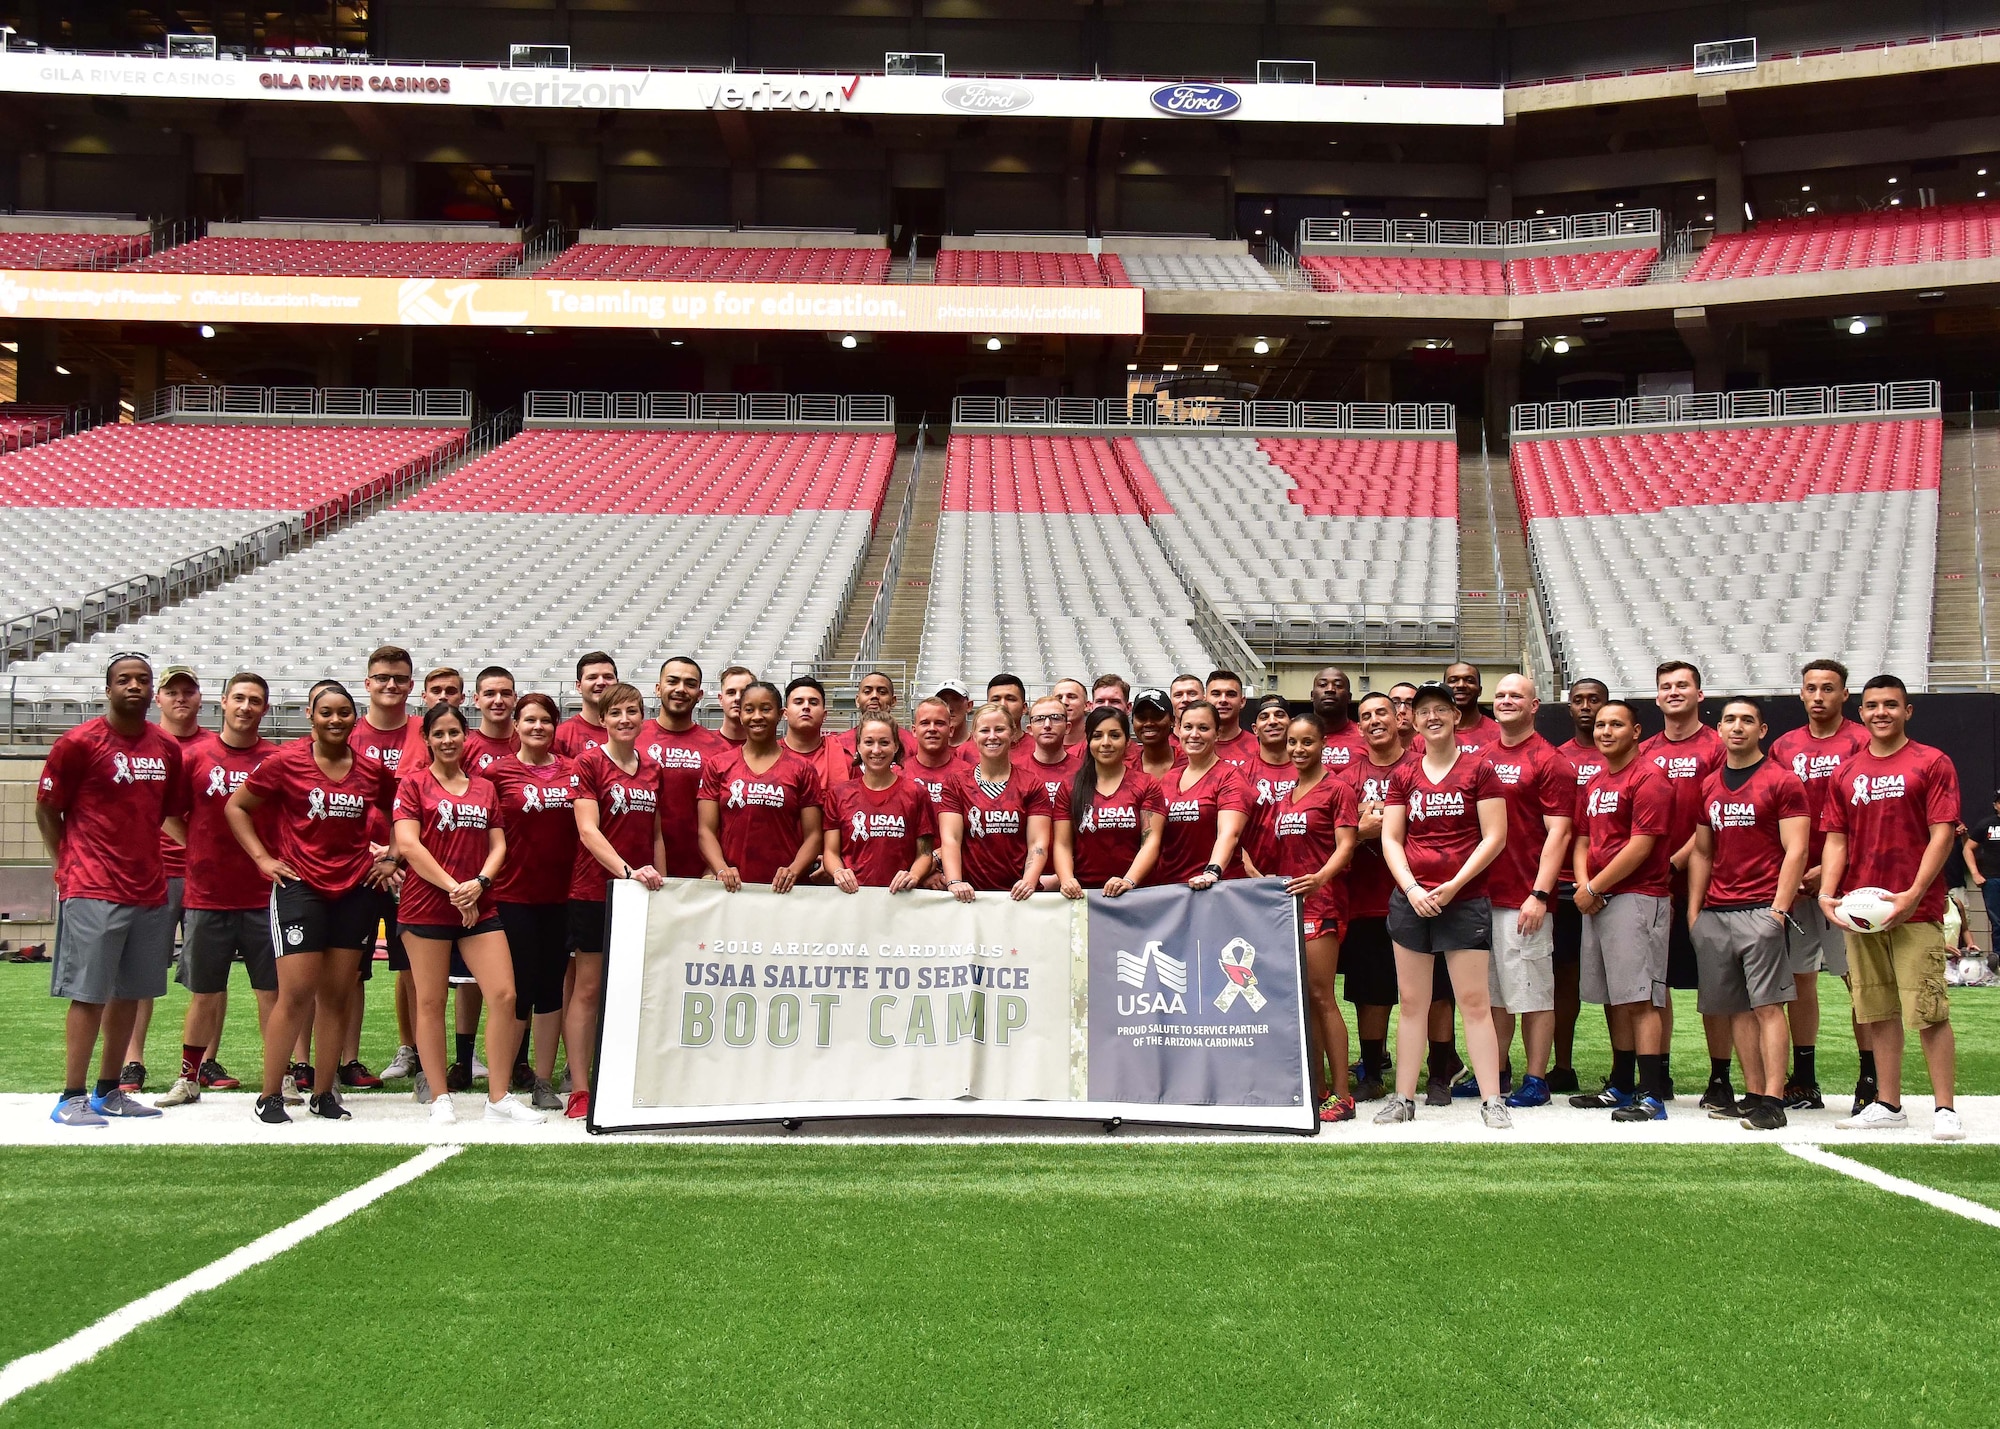 Around 65 service members from Luke Air Force Base, Arizona, participate in the 2018 USAA Salute to Service Arizona Cardinals National Football League Boot-Camp experience Aug 2 at the University of Phoenix Stadium, Glendale, Ariz.